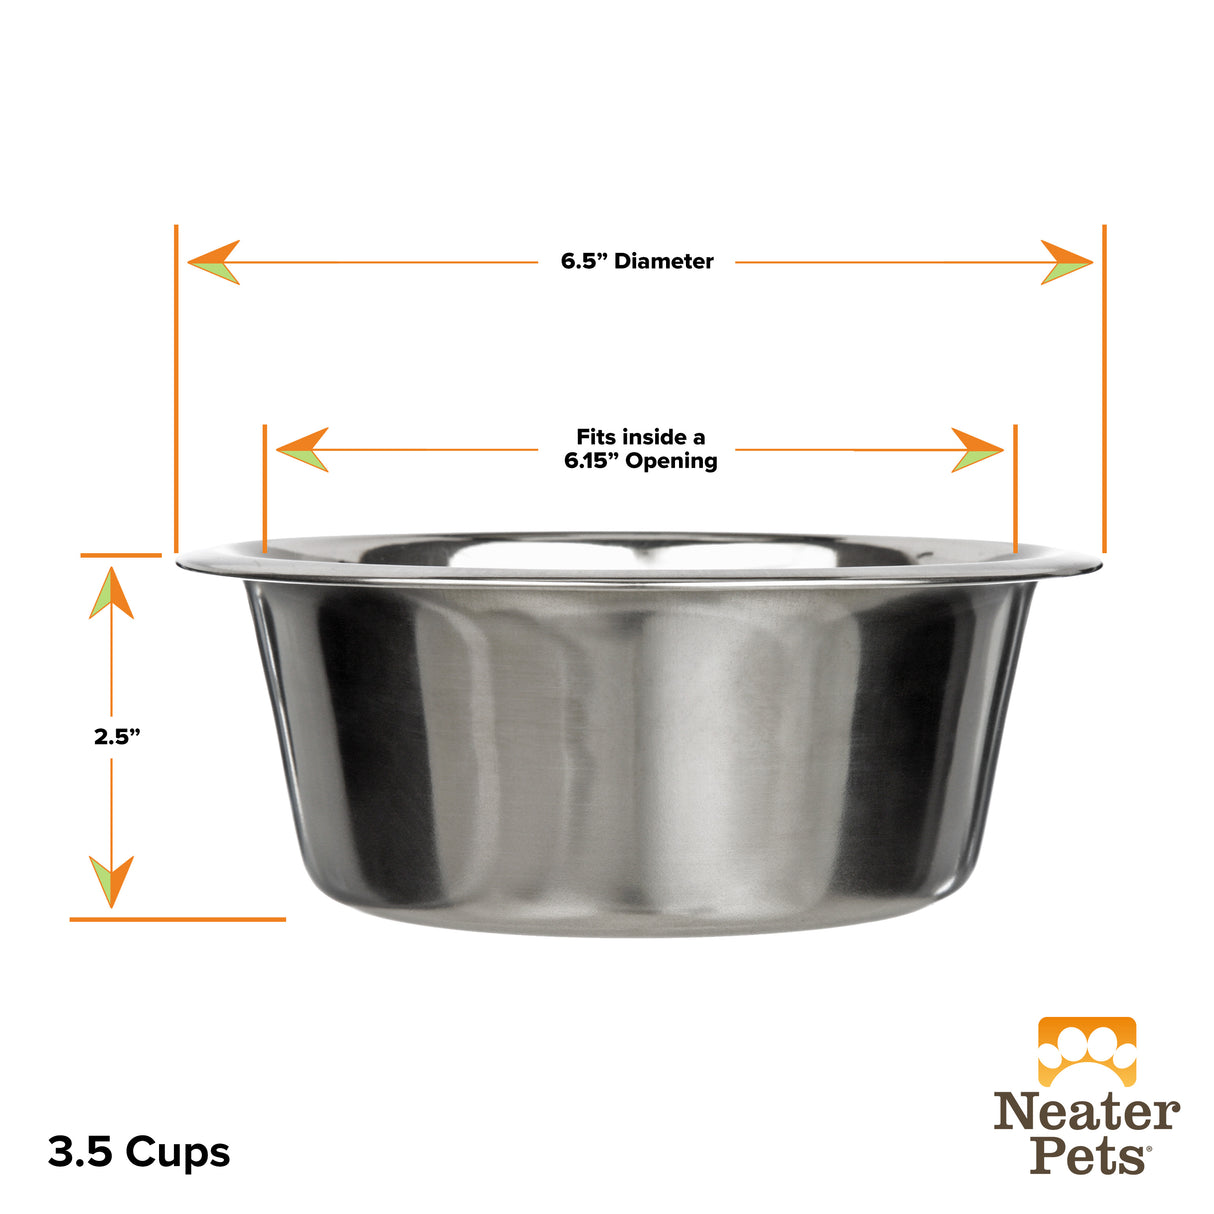 3.5 cup Stainless Steel Replacement Bowls for Neater Feeder dimensions